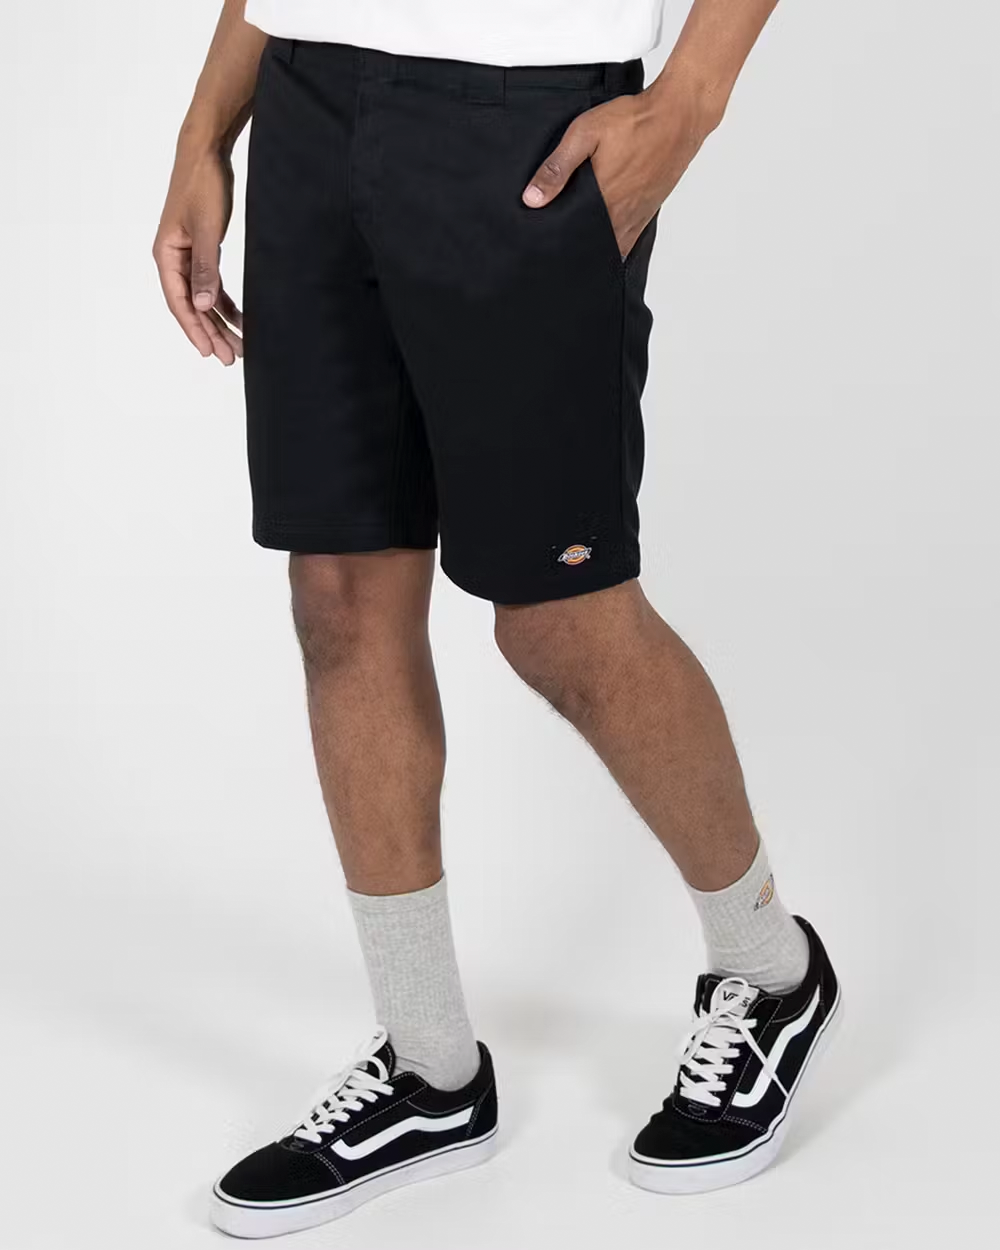 DICKIES 852 Relaxed Fit 11 Work Shorts - Black - VENUE.